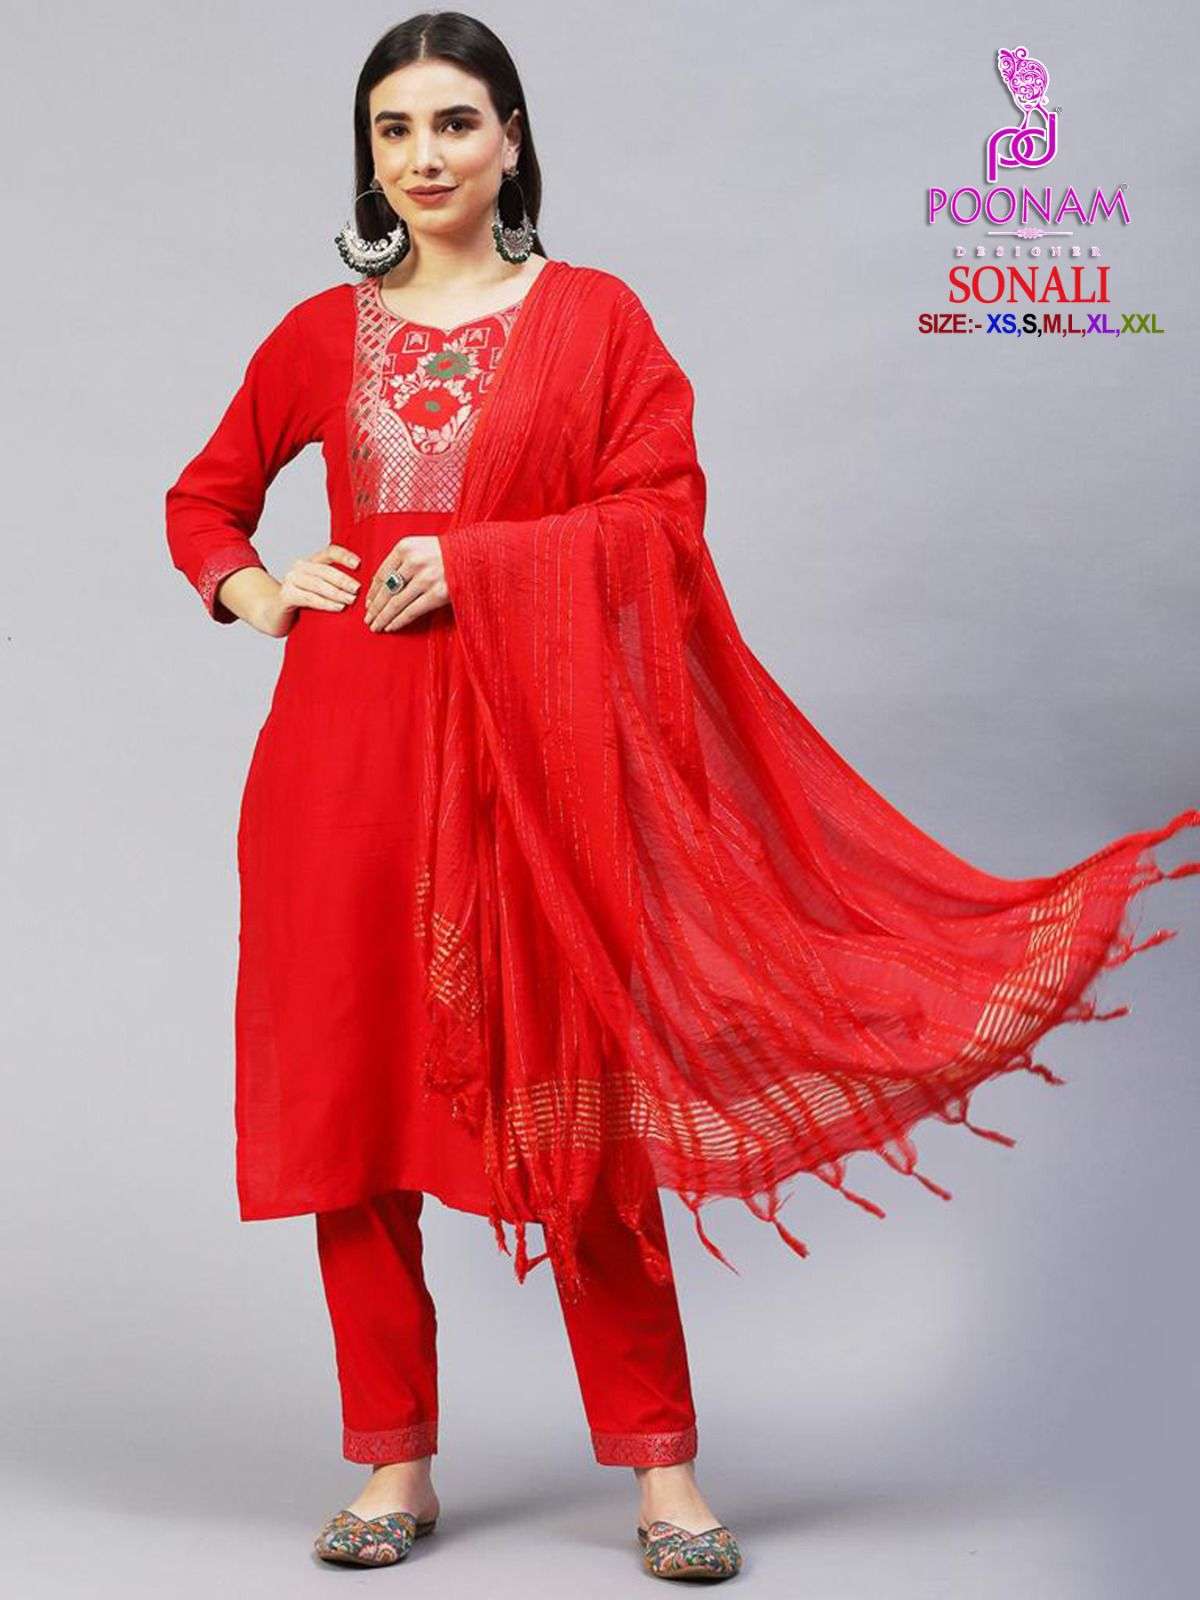 Sonali By Poonam Designer 1001 To 1005 Series Beautiful Stylish Festive Suits Fancy Colorful Casual Wear & Ethnic Wear & Ready To Wear Cotton Dresses At Wholesale Price